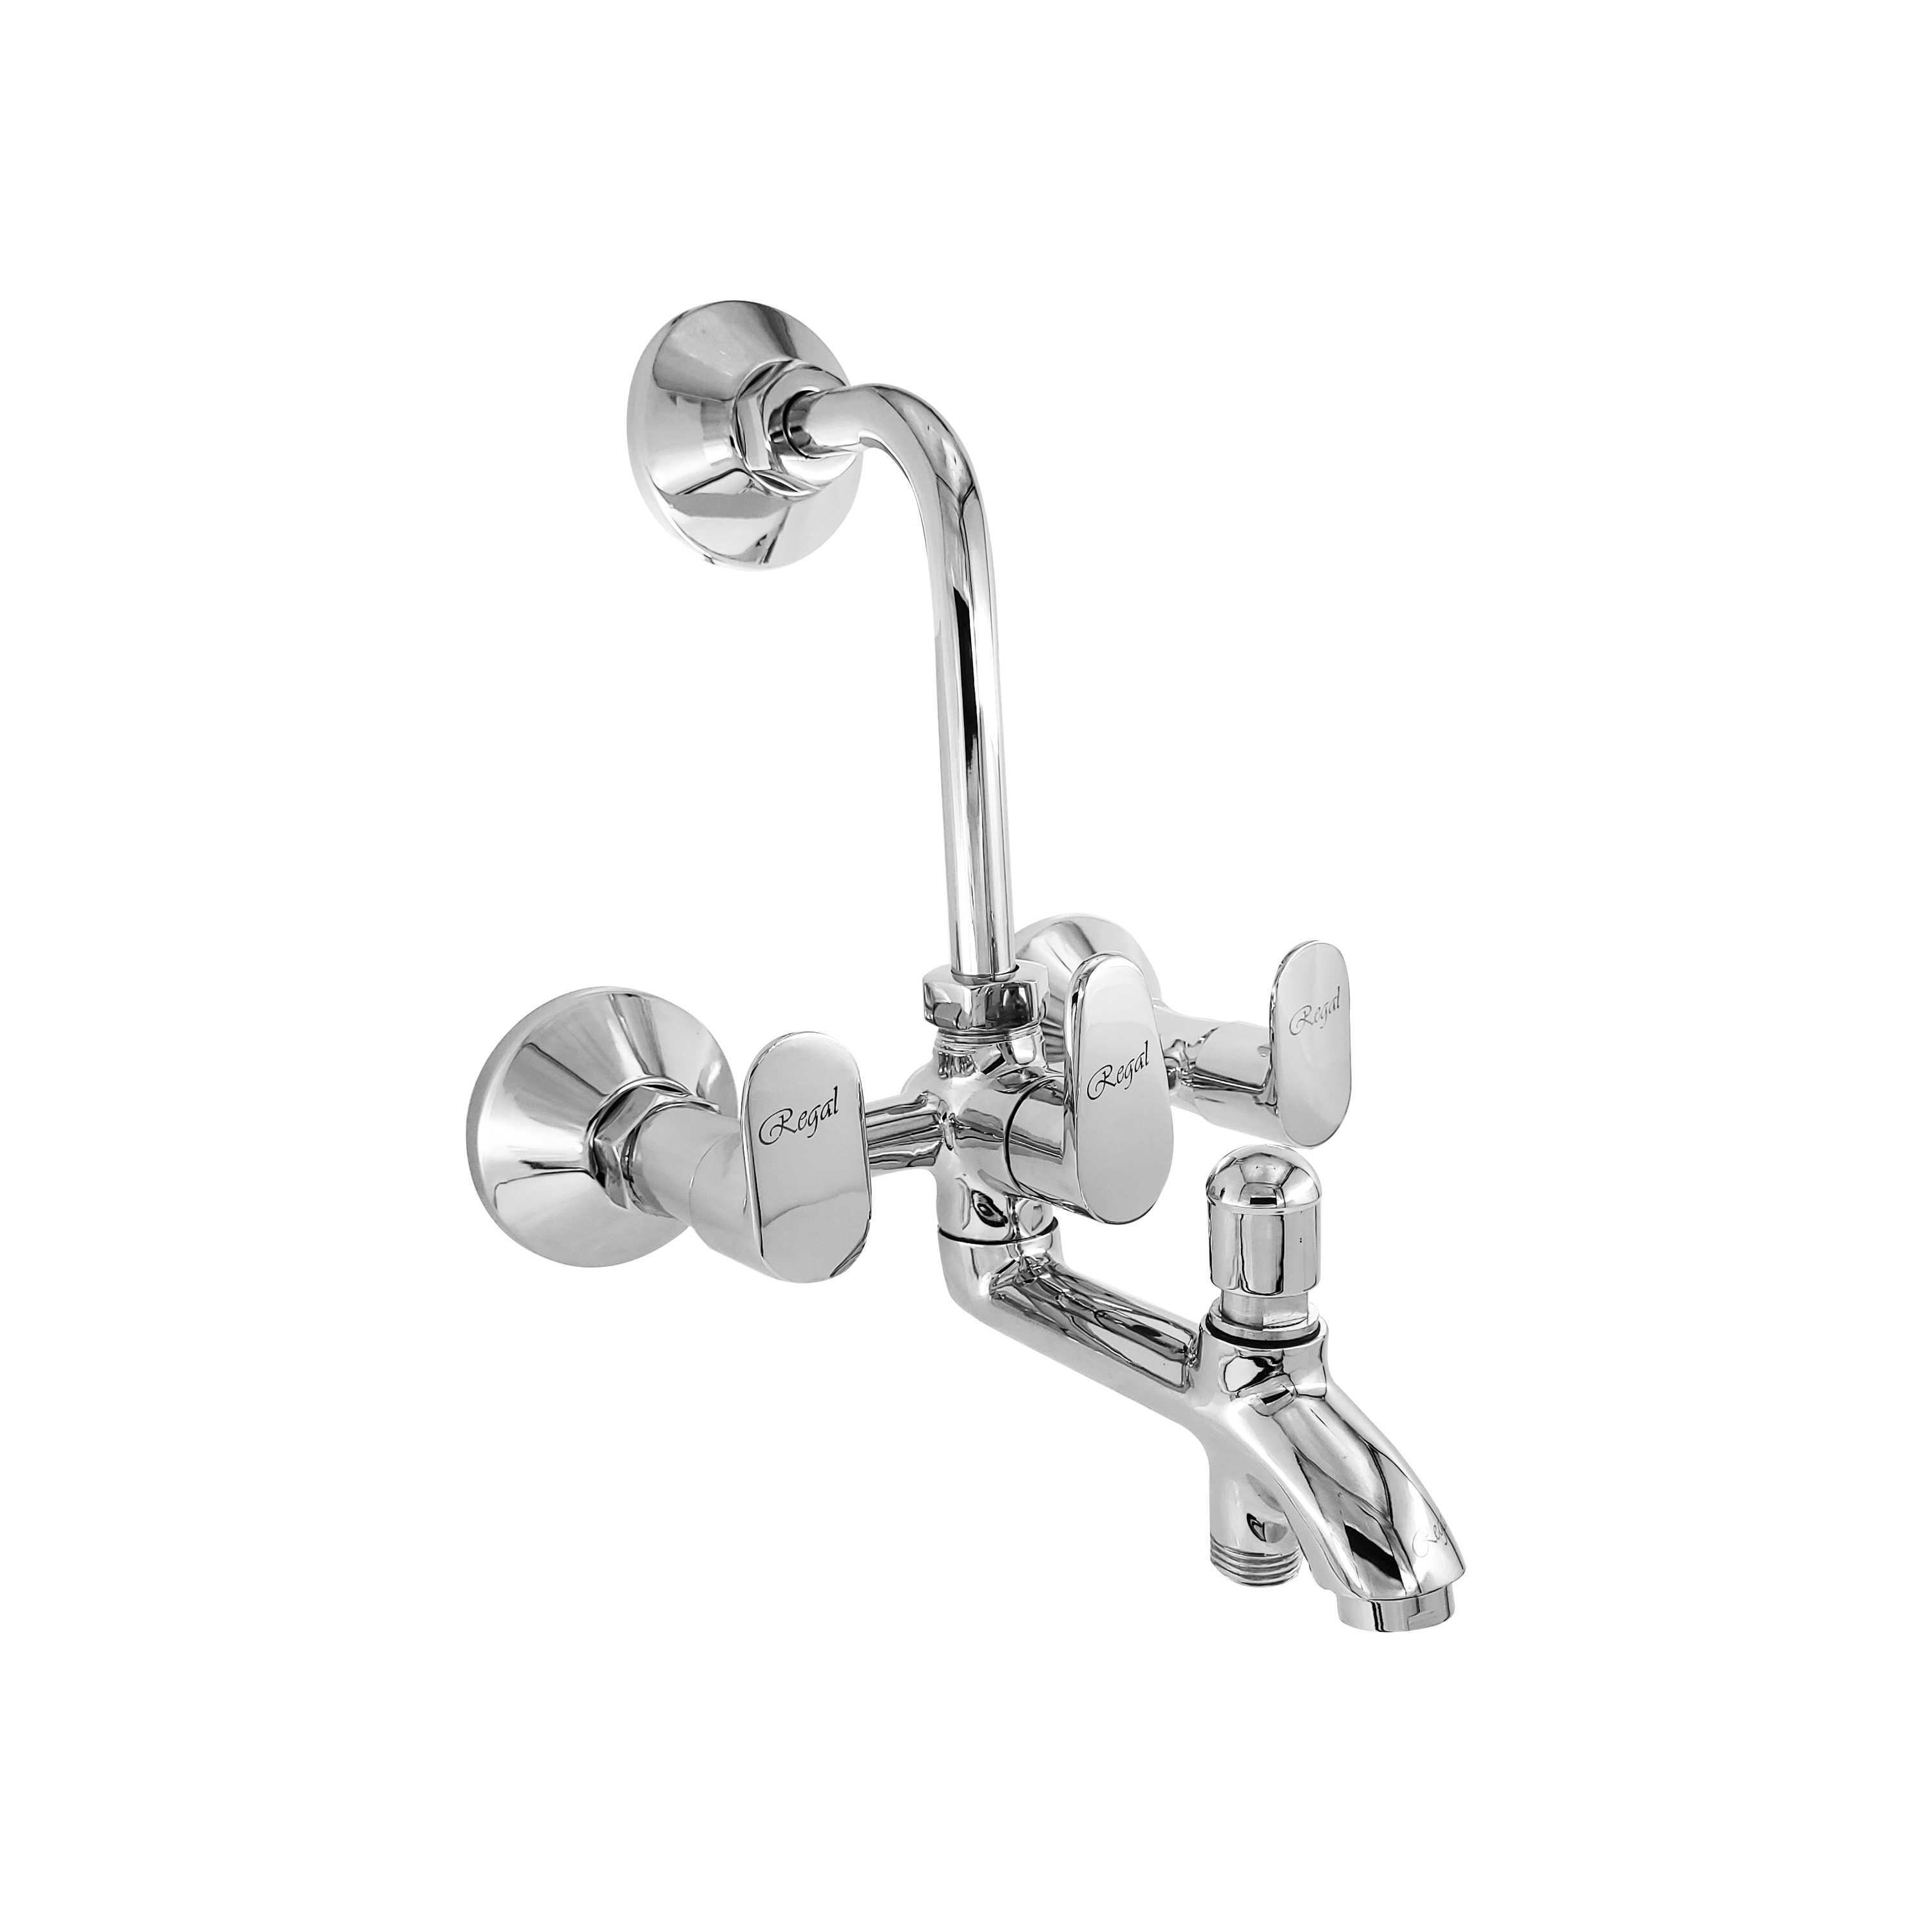 Veros Wall Mixer Three In One